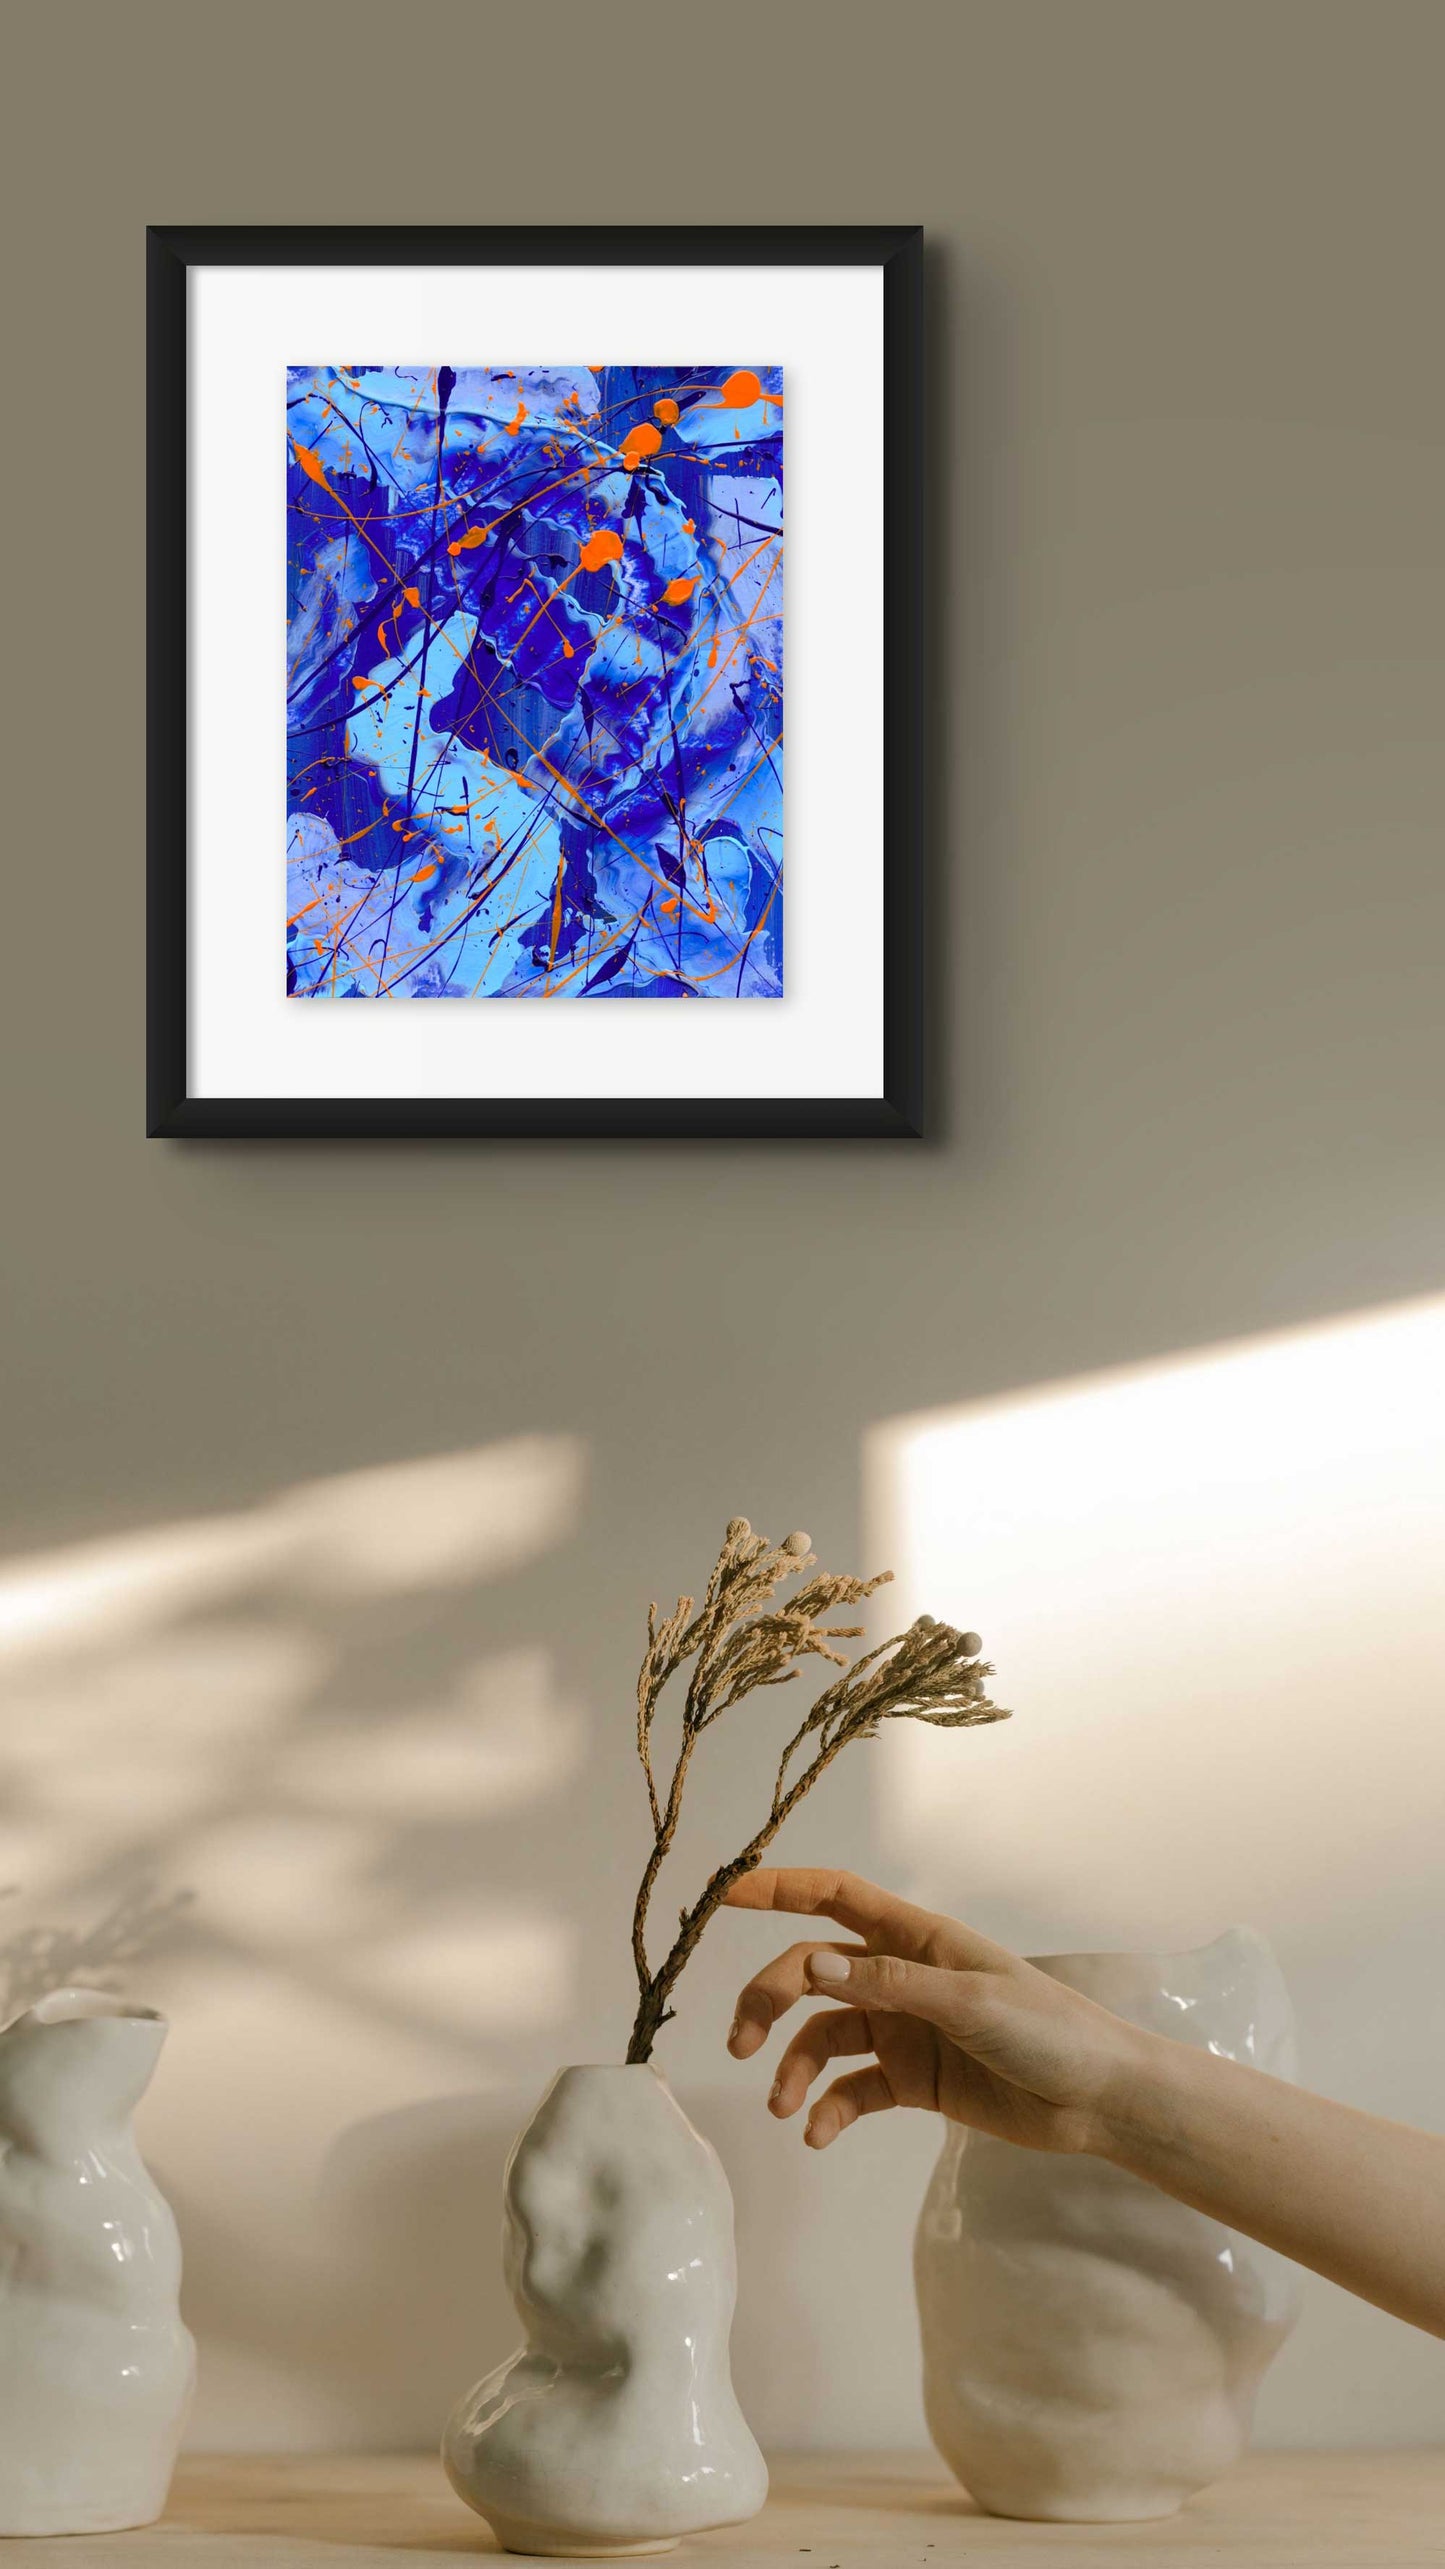 Blue I, original abstract painting seen in black frame hanging on wall with vase. Abstract by Bridget Bradley